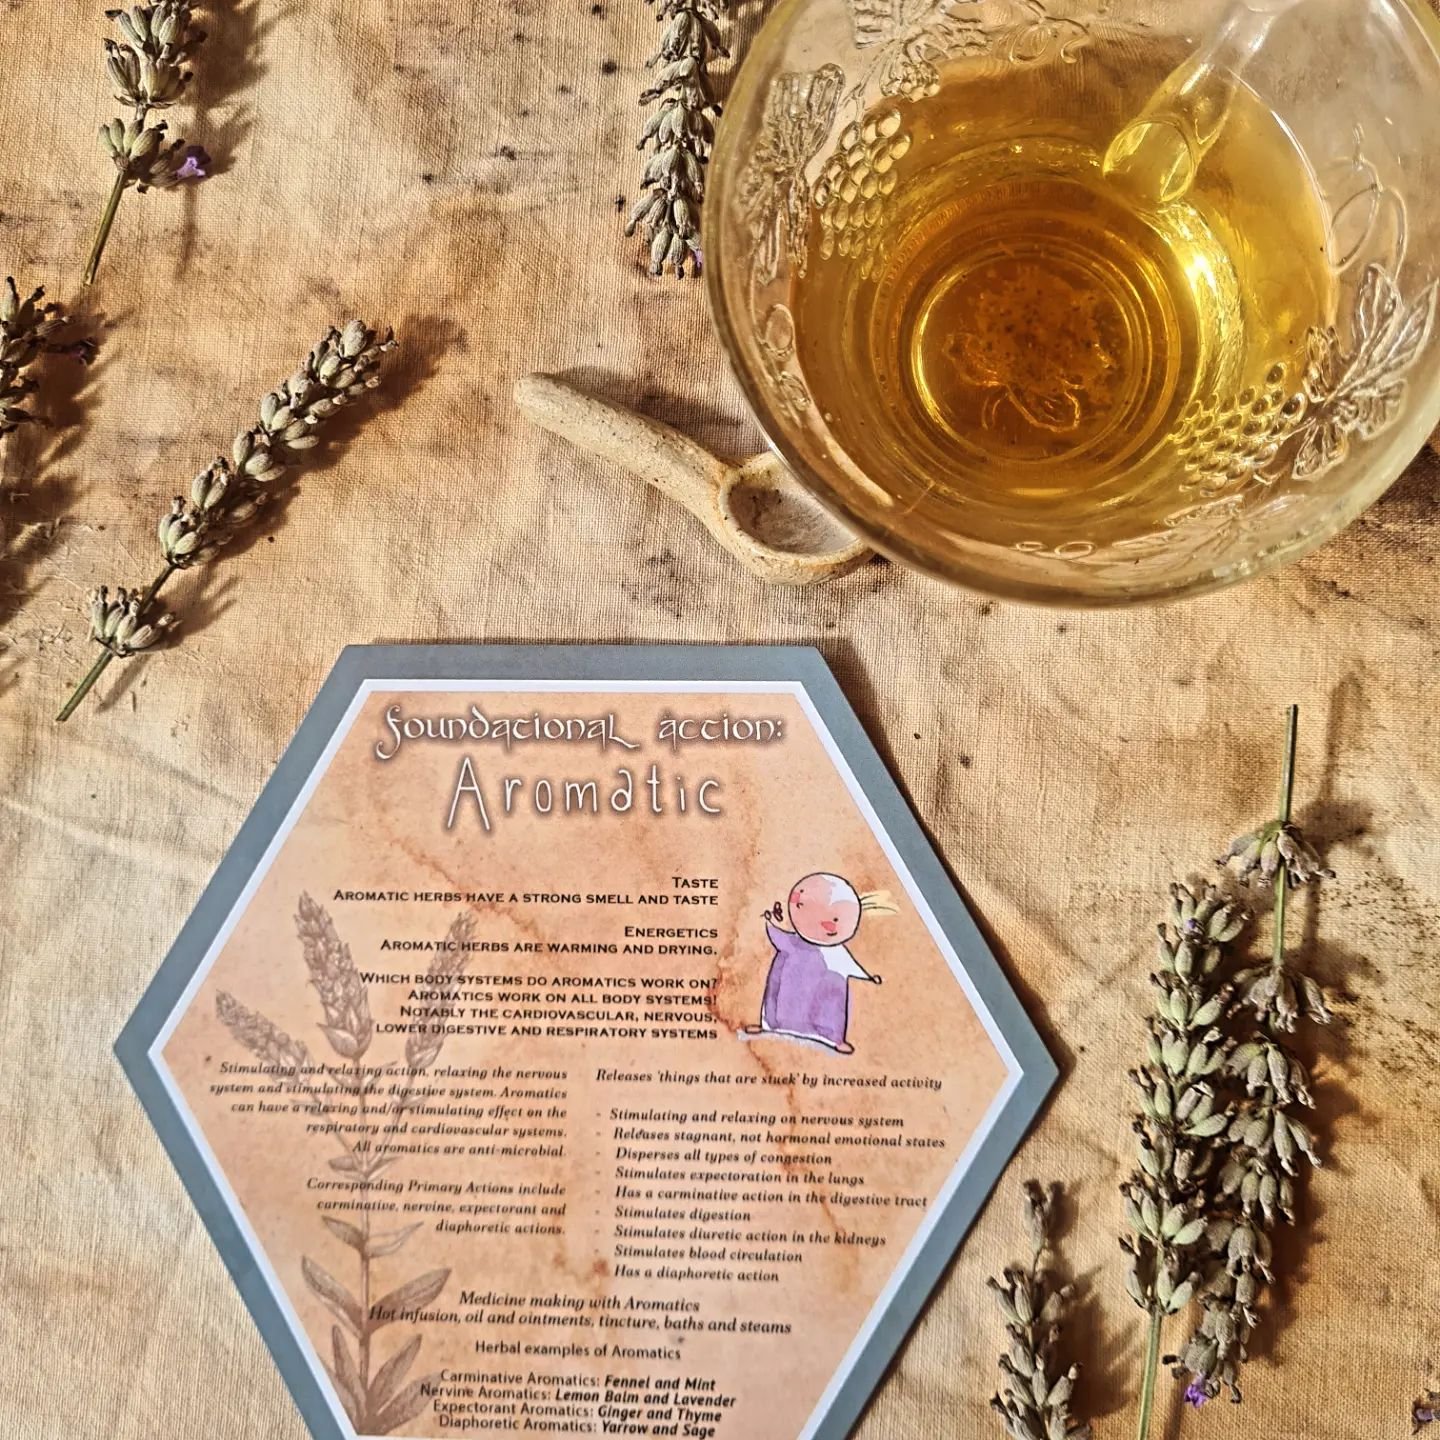 Foundational (or Sensory) Actions
How to use your senses to understand herbs 💜🌱

With the help of our Botanical Education Knowledge Cards, we explored which herbal actions can be discerned using the senses, today in The Herbal Apprentice. 

With to